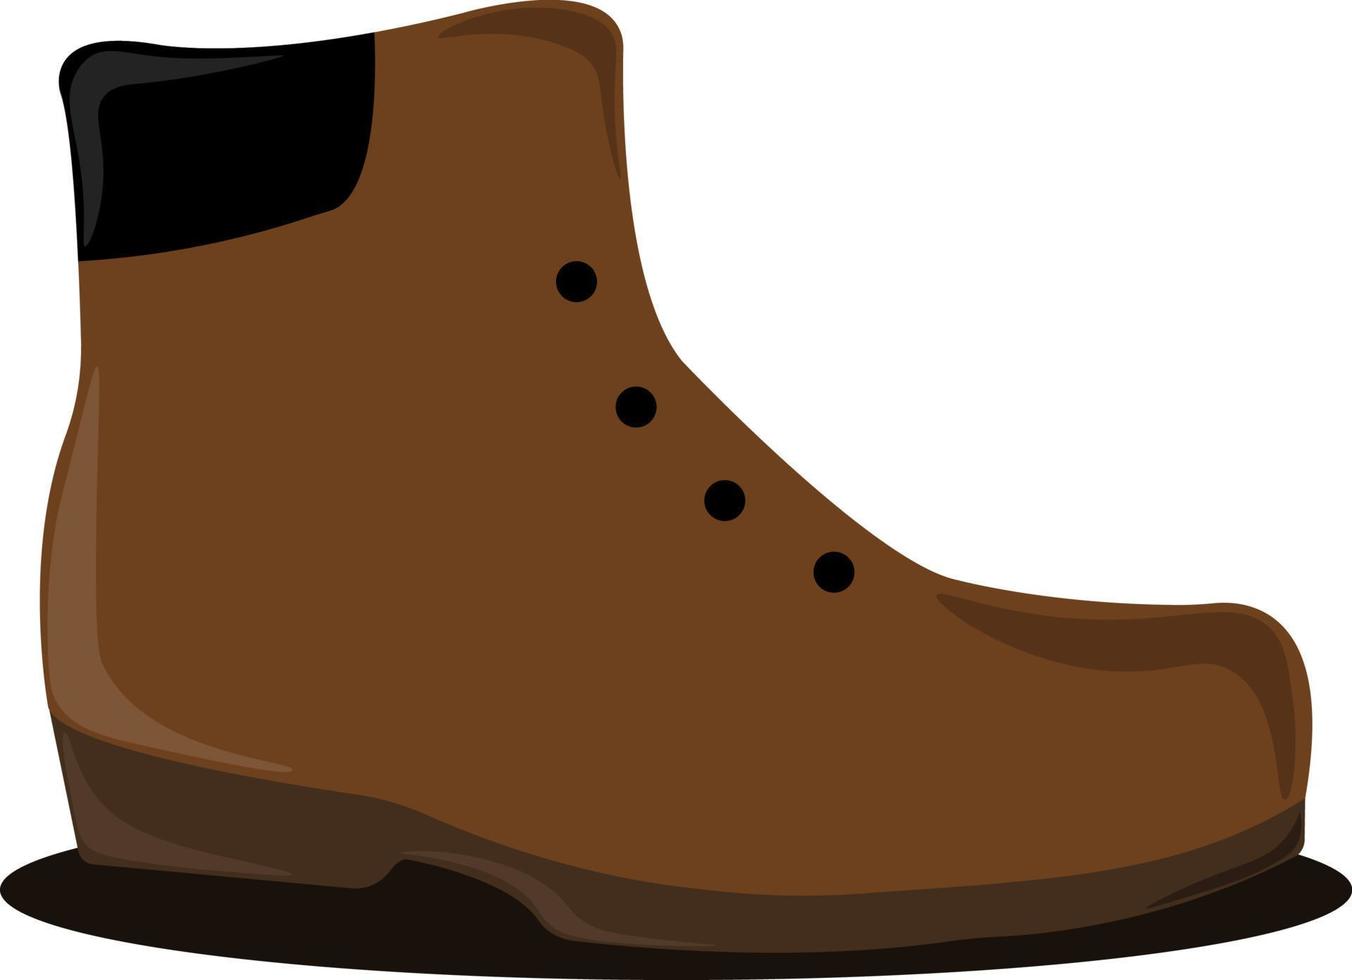 Brown boots, illustration, vector on white background.